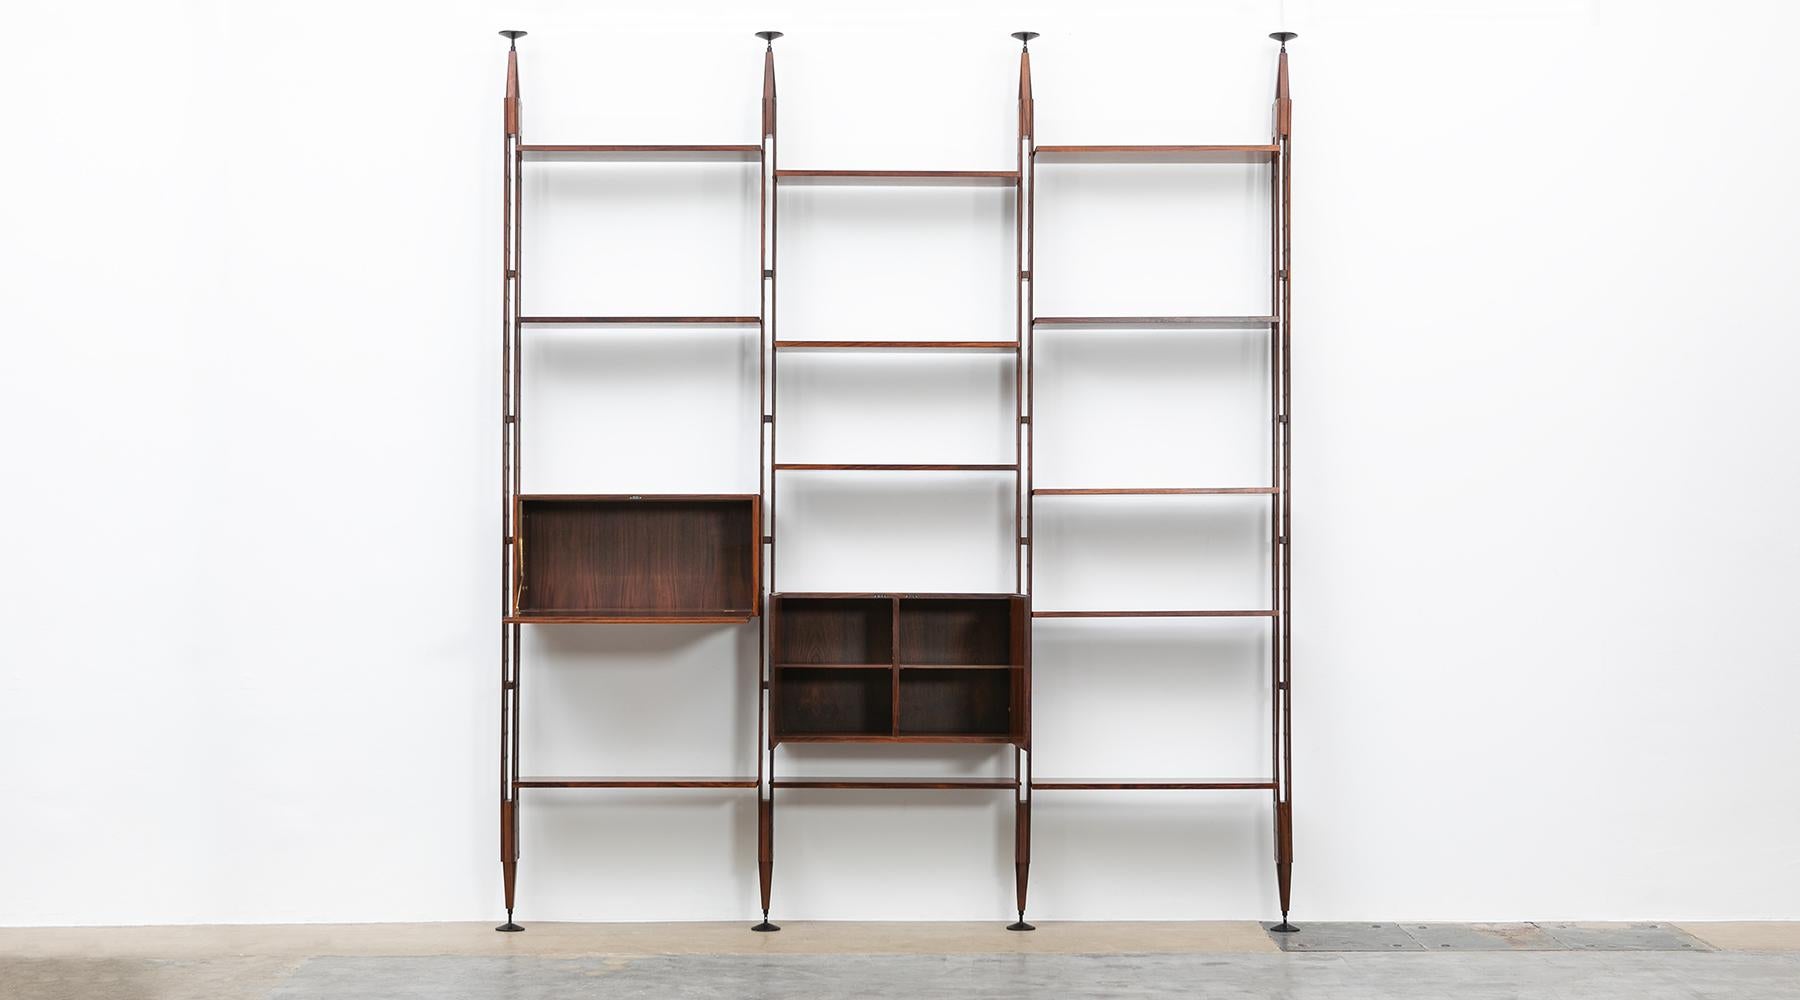 Teak and lacquered aluminum Library, Franco Ablini for Poggi, Italy, 1950.

Elegant Franco Albini library or room divider in teak comes in three rows. Shelves and the two units can be adjusted or put in different positions. The feet are in